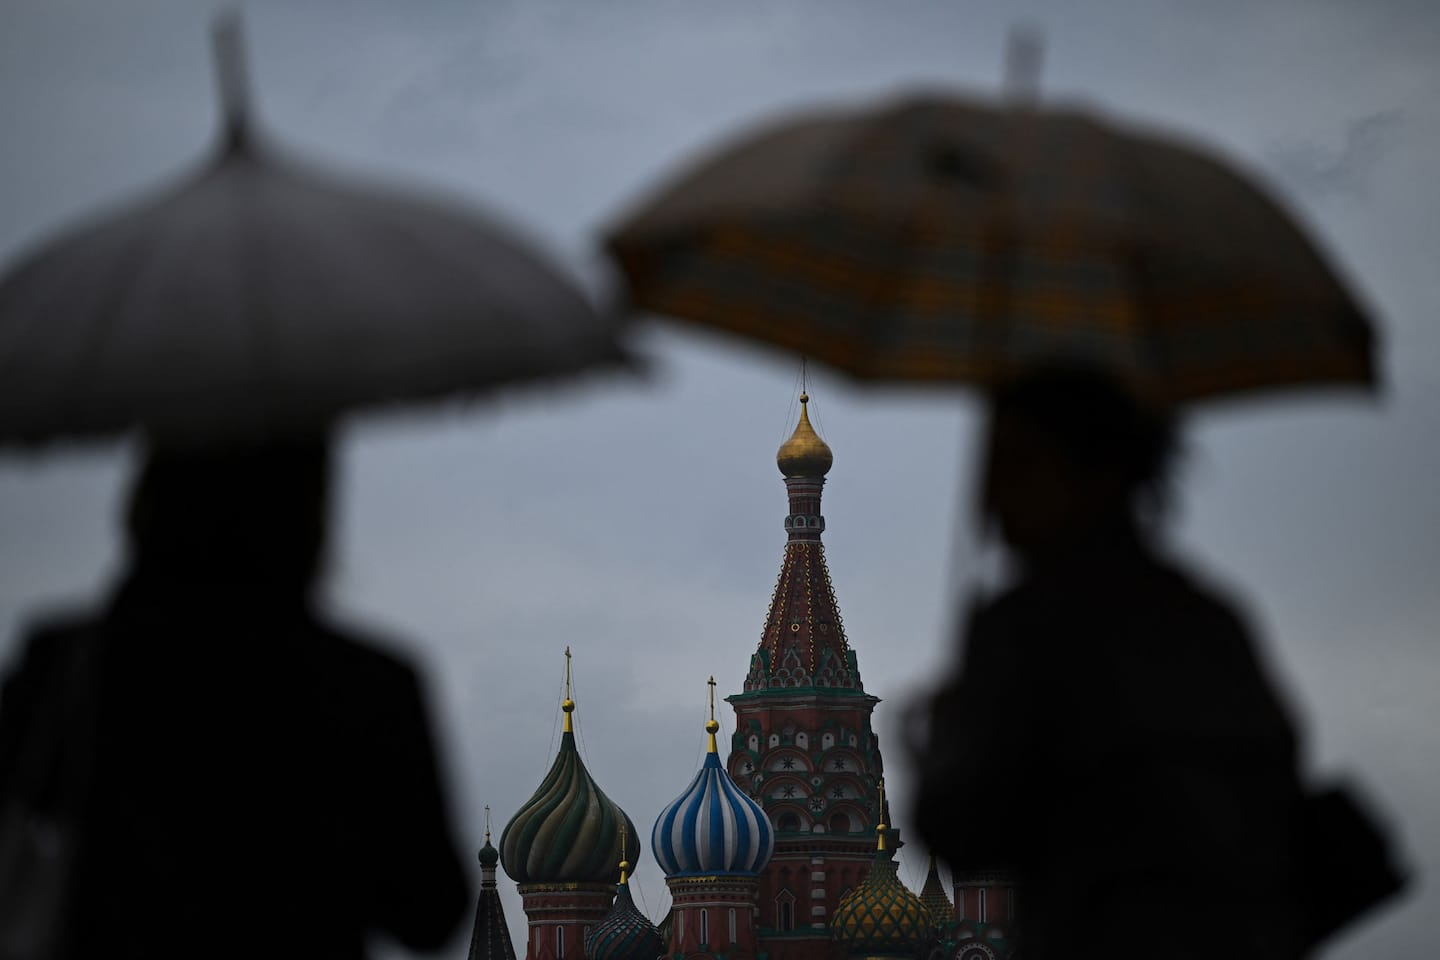 Where are the sanctions targeting the Russian economy?